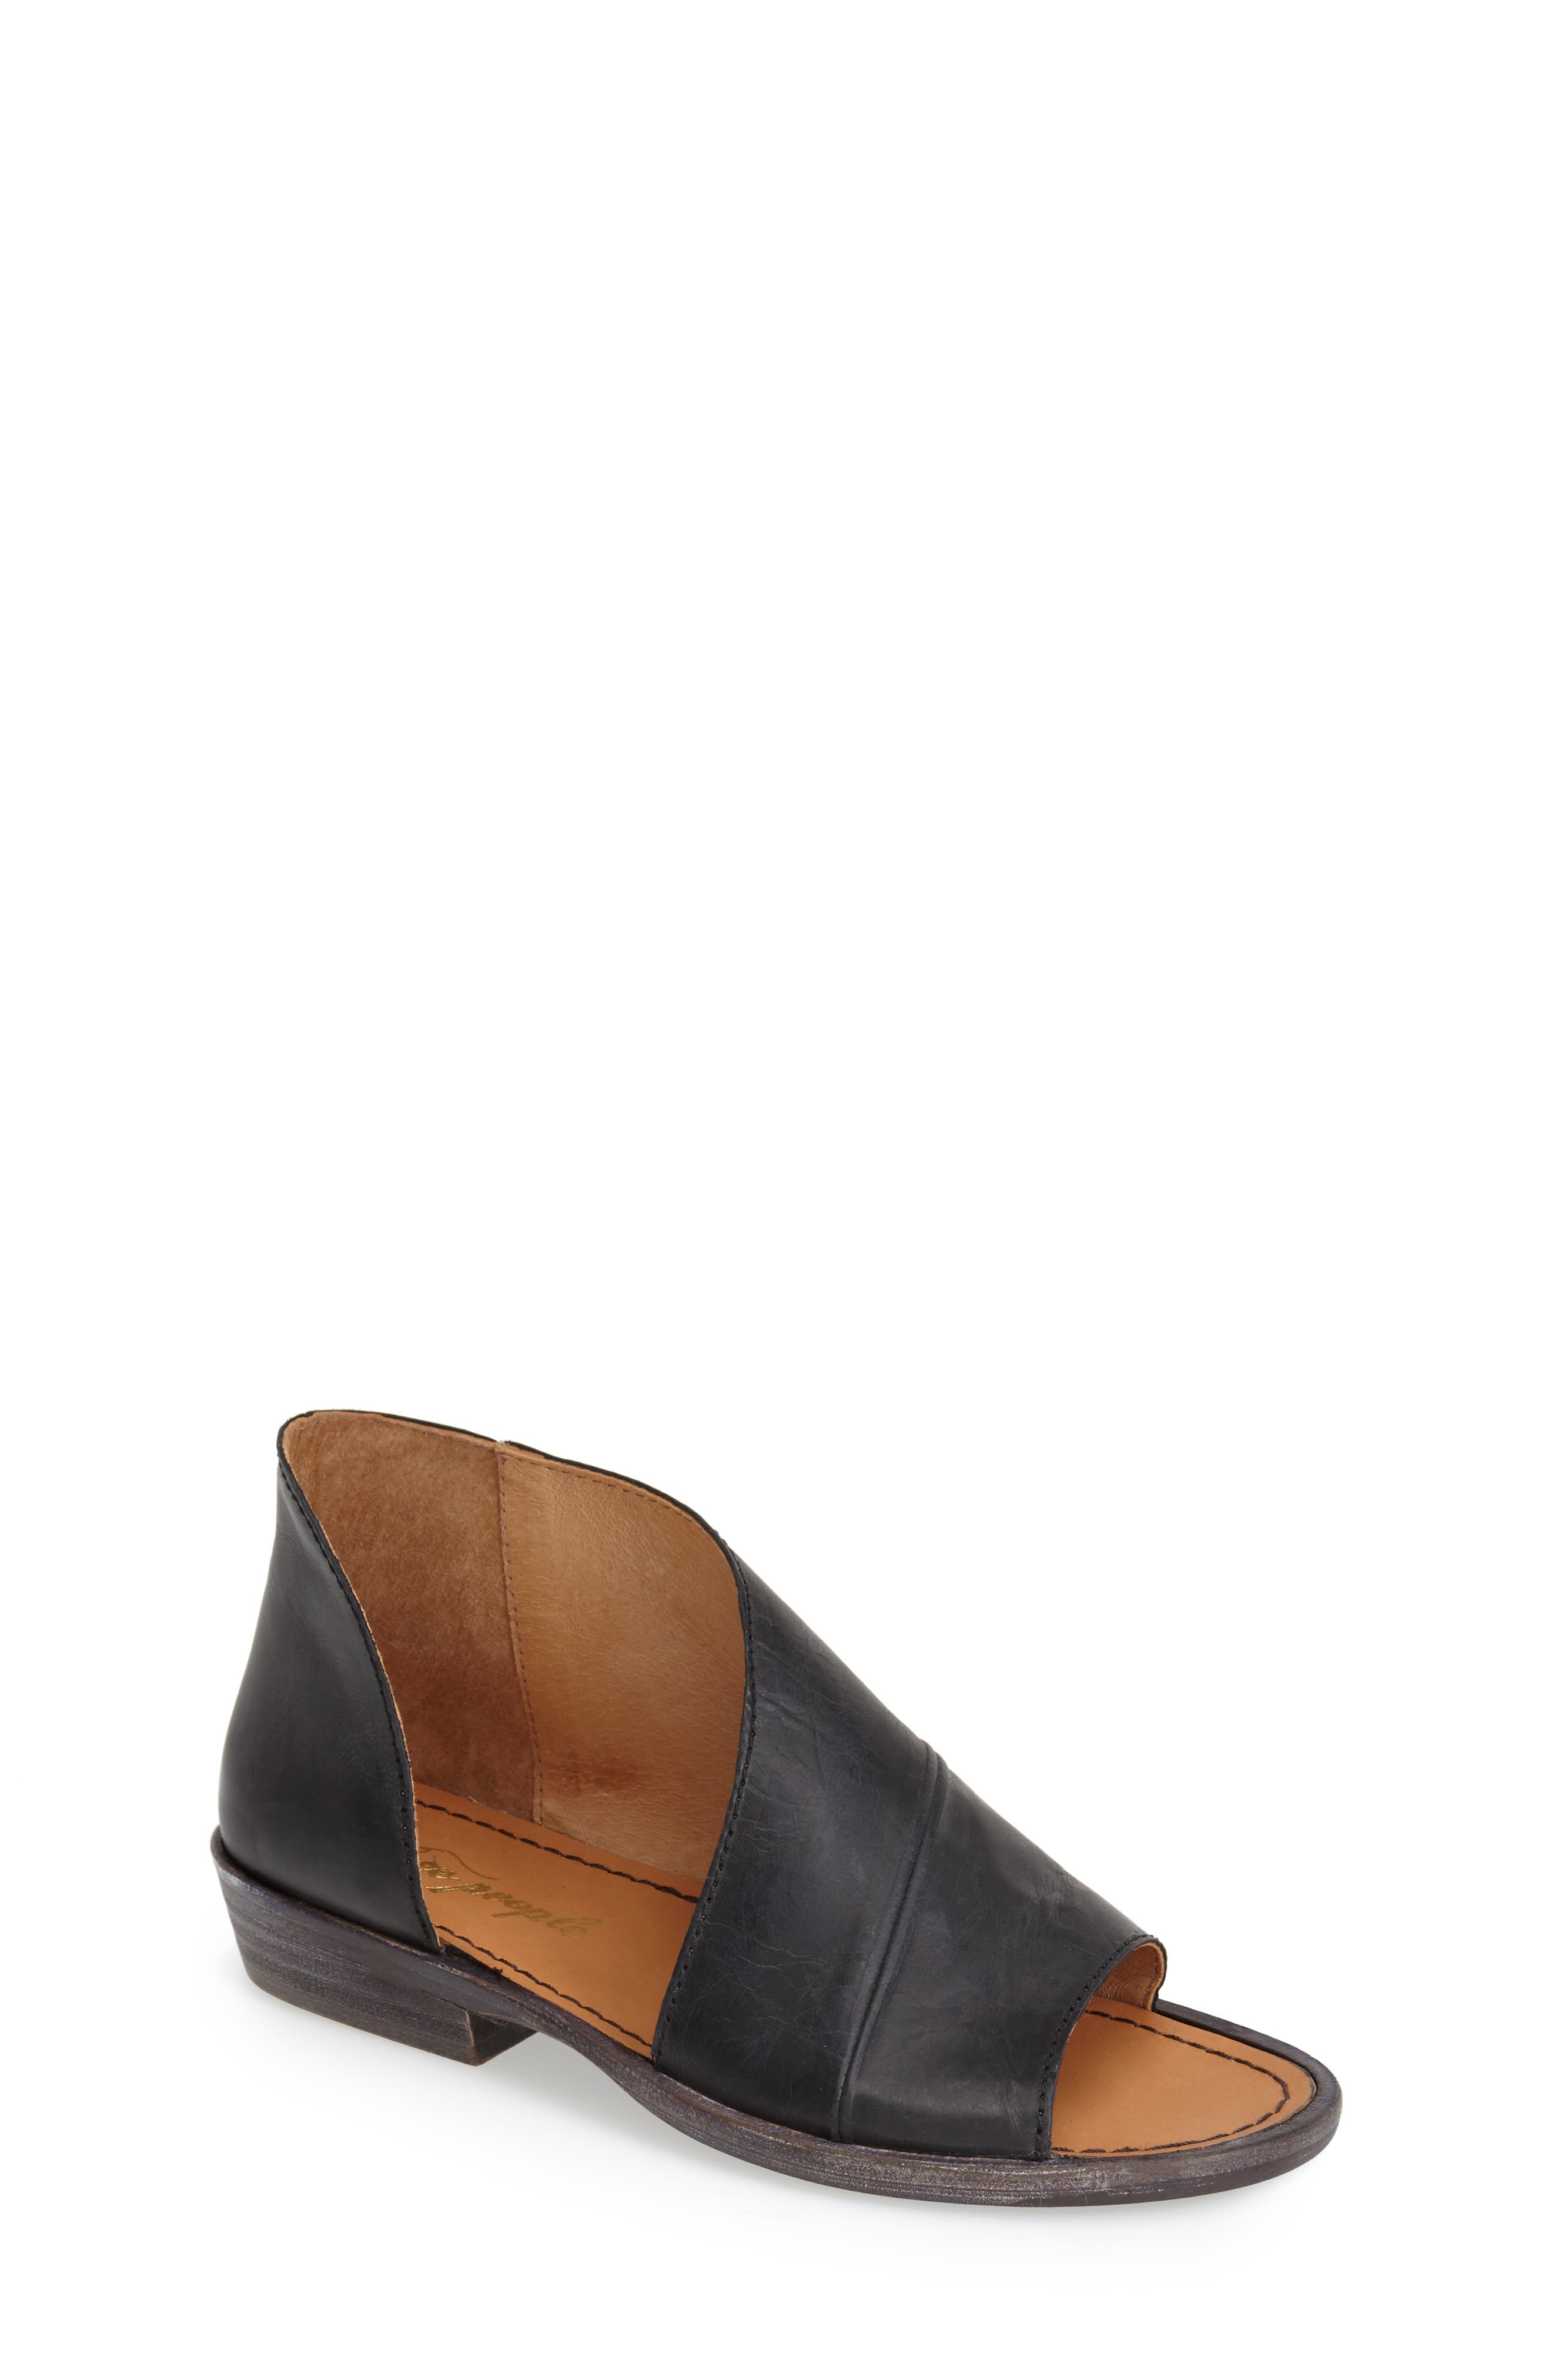 nordstrom free people shoes